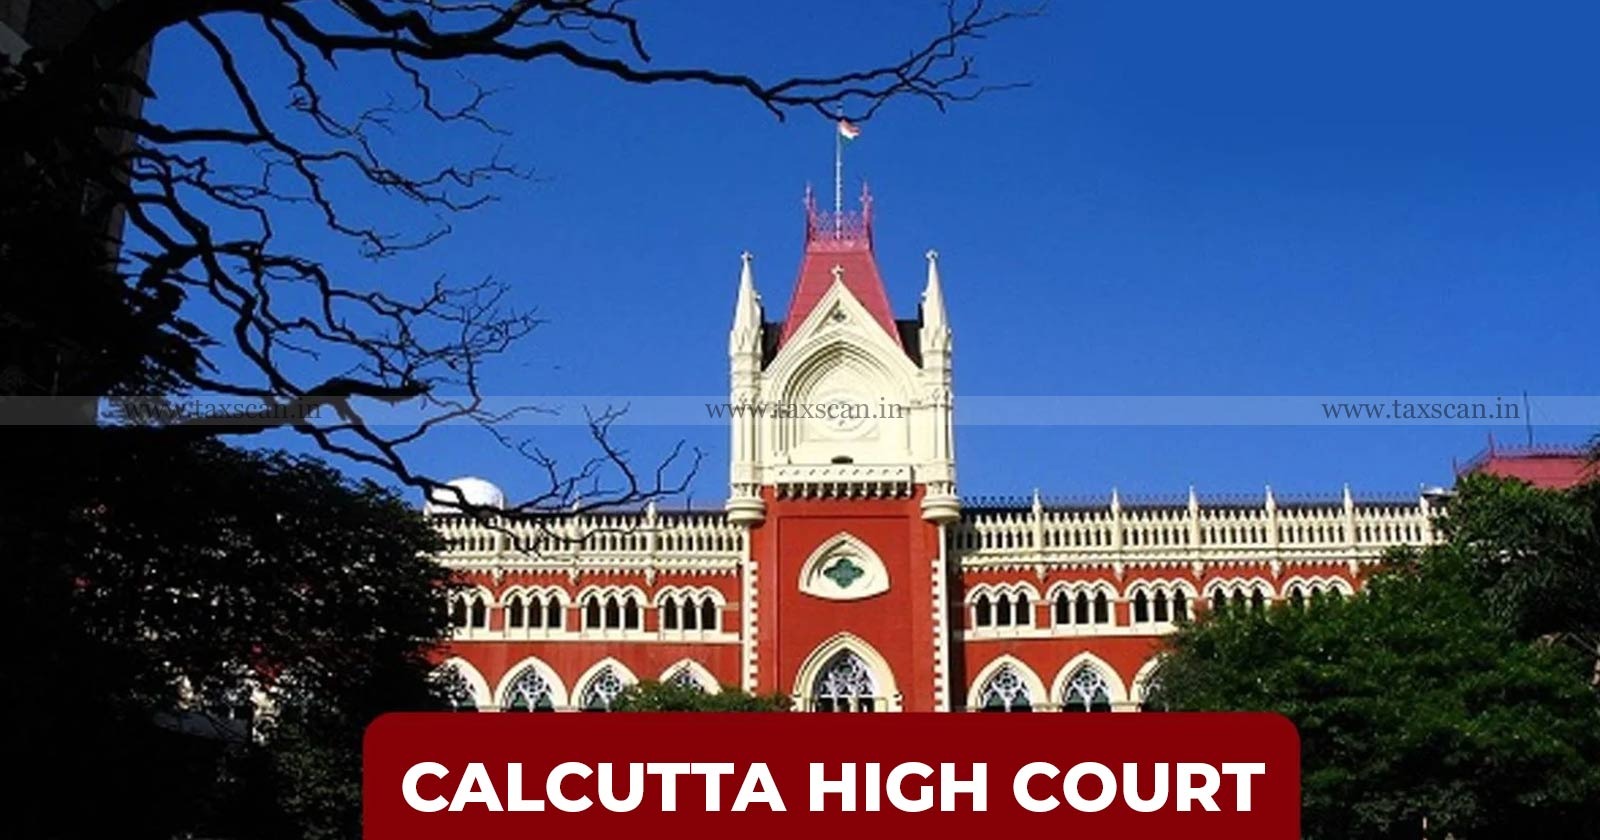 Calcutta high court - kuntal ghosh - Illegal Appointments - inducement to pay wrongful gratification for illegal appointments - taxscan